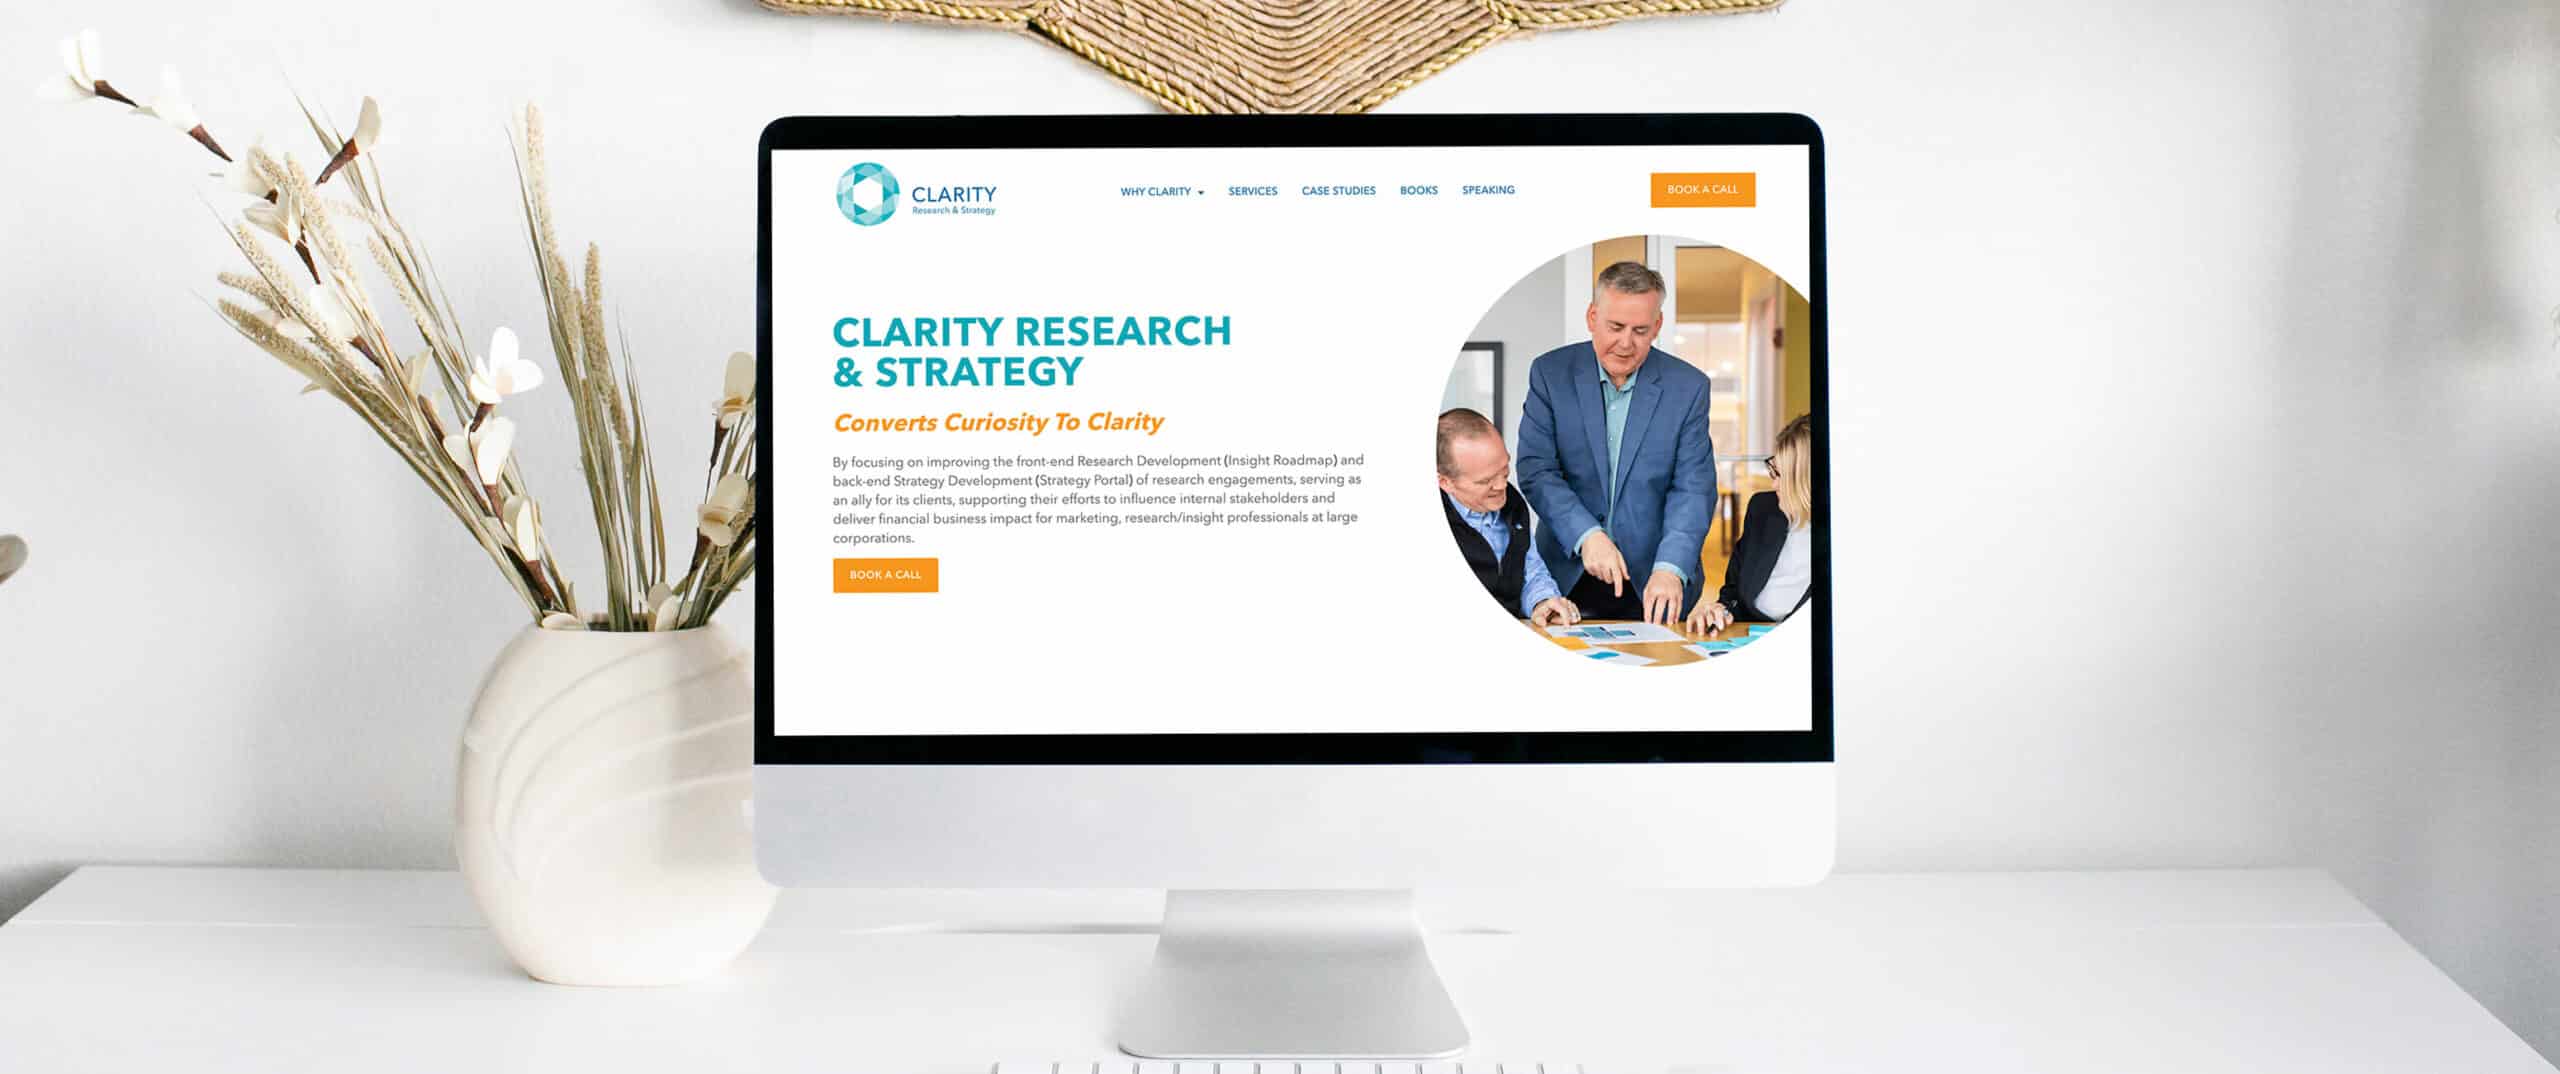 Website case study for a market research firm